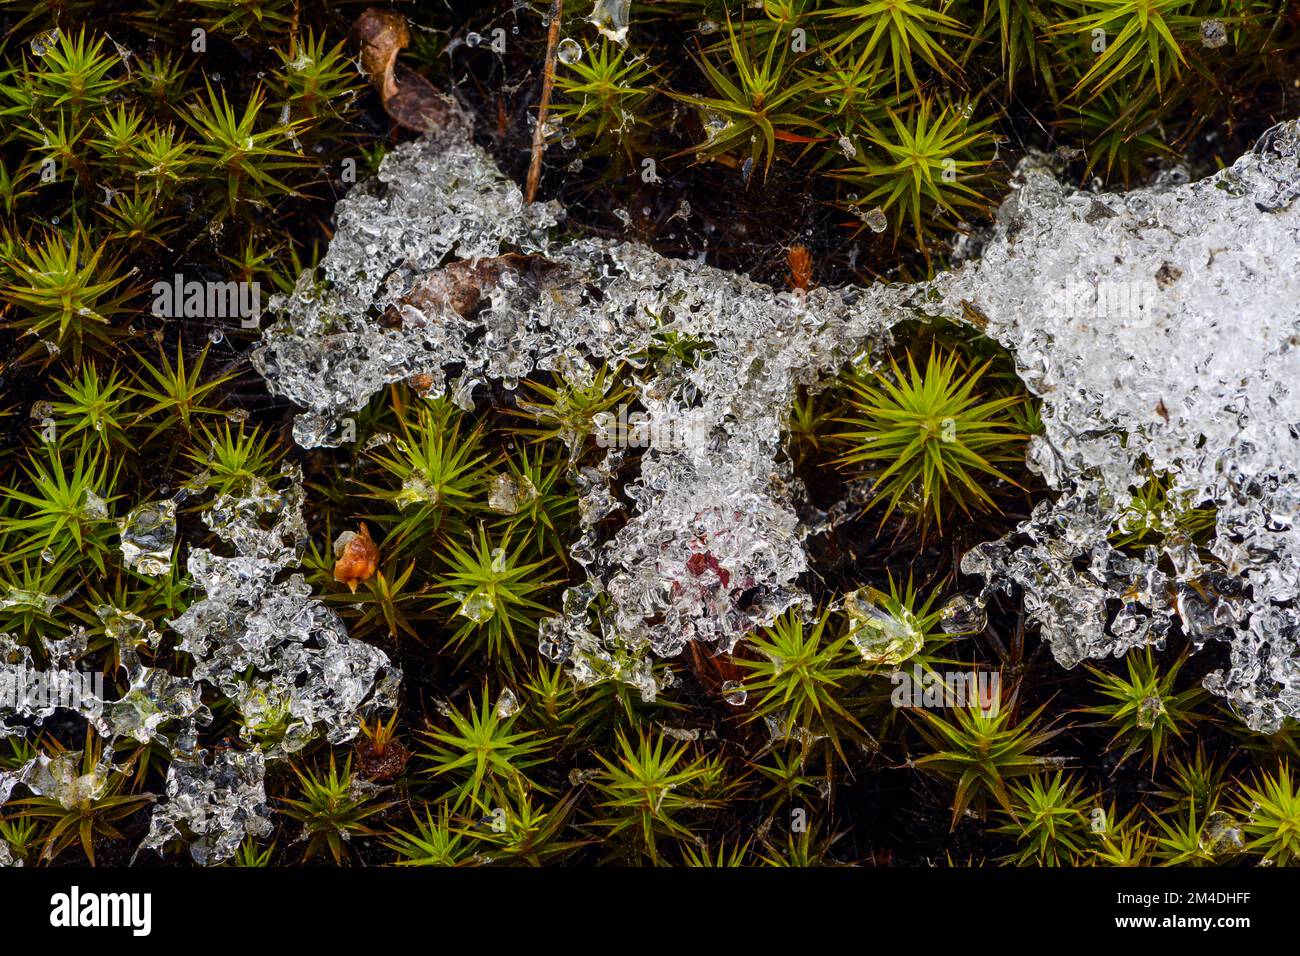 Melting snow, Haircap moss (Polytrichum commune)  beds in early spring, Greater Sudbury, Ontario, Canada Stock Photo